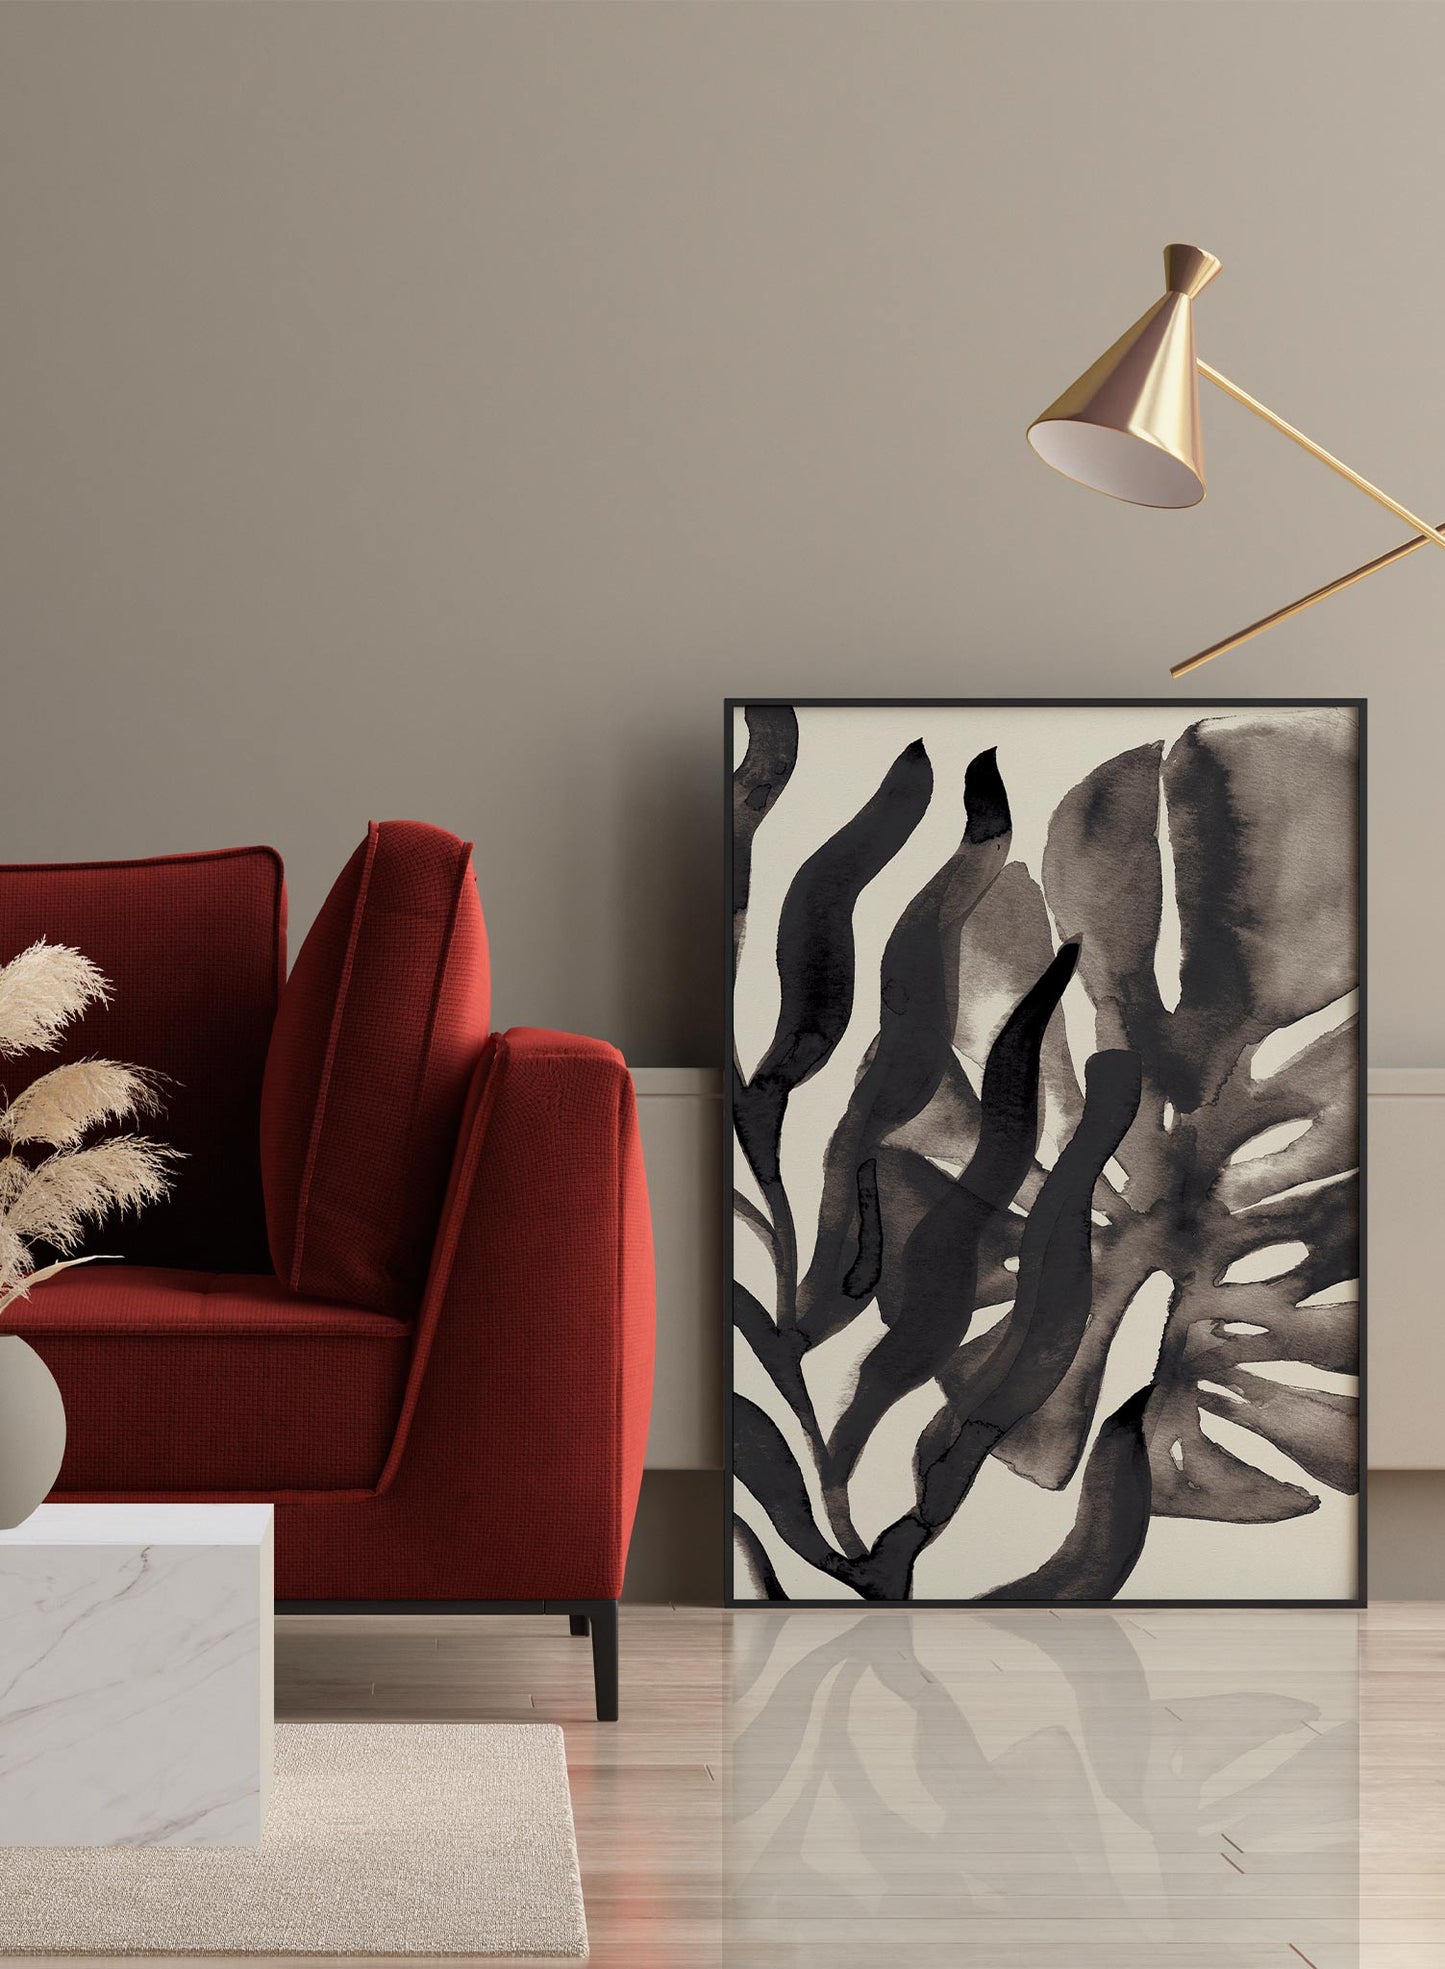 Noctural Monstera is a minimalist illustration of the close-up shot of a giant black monstera leaf by Opposite Wall.